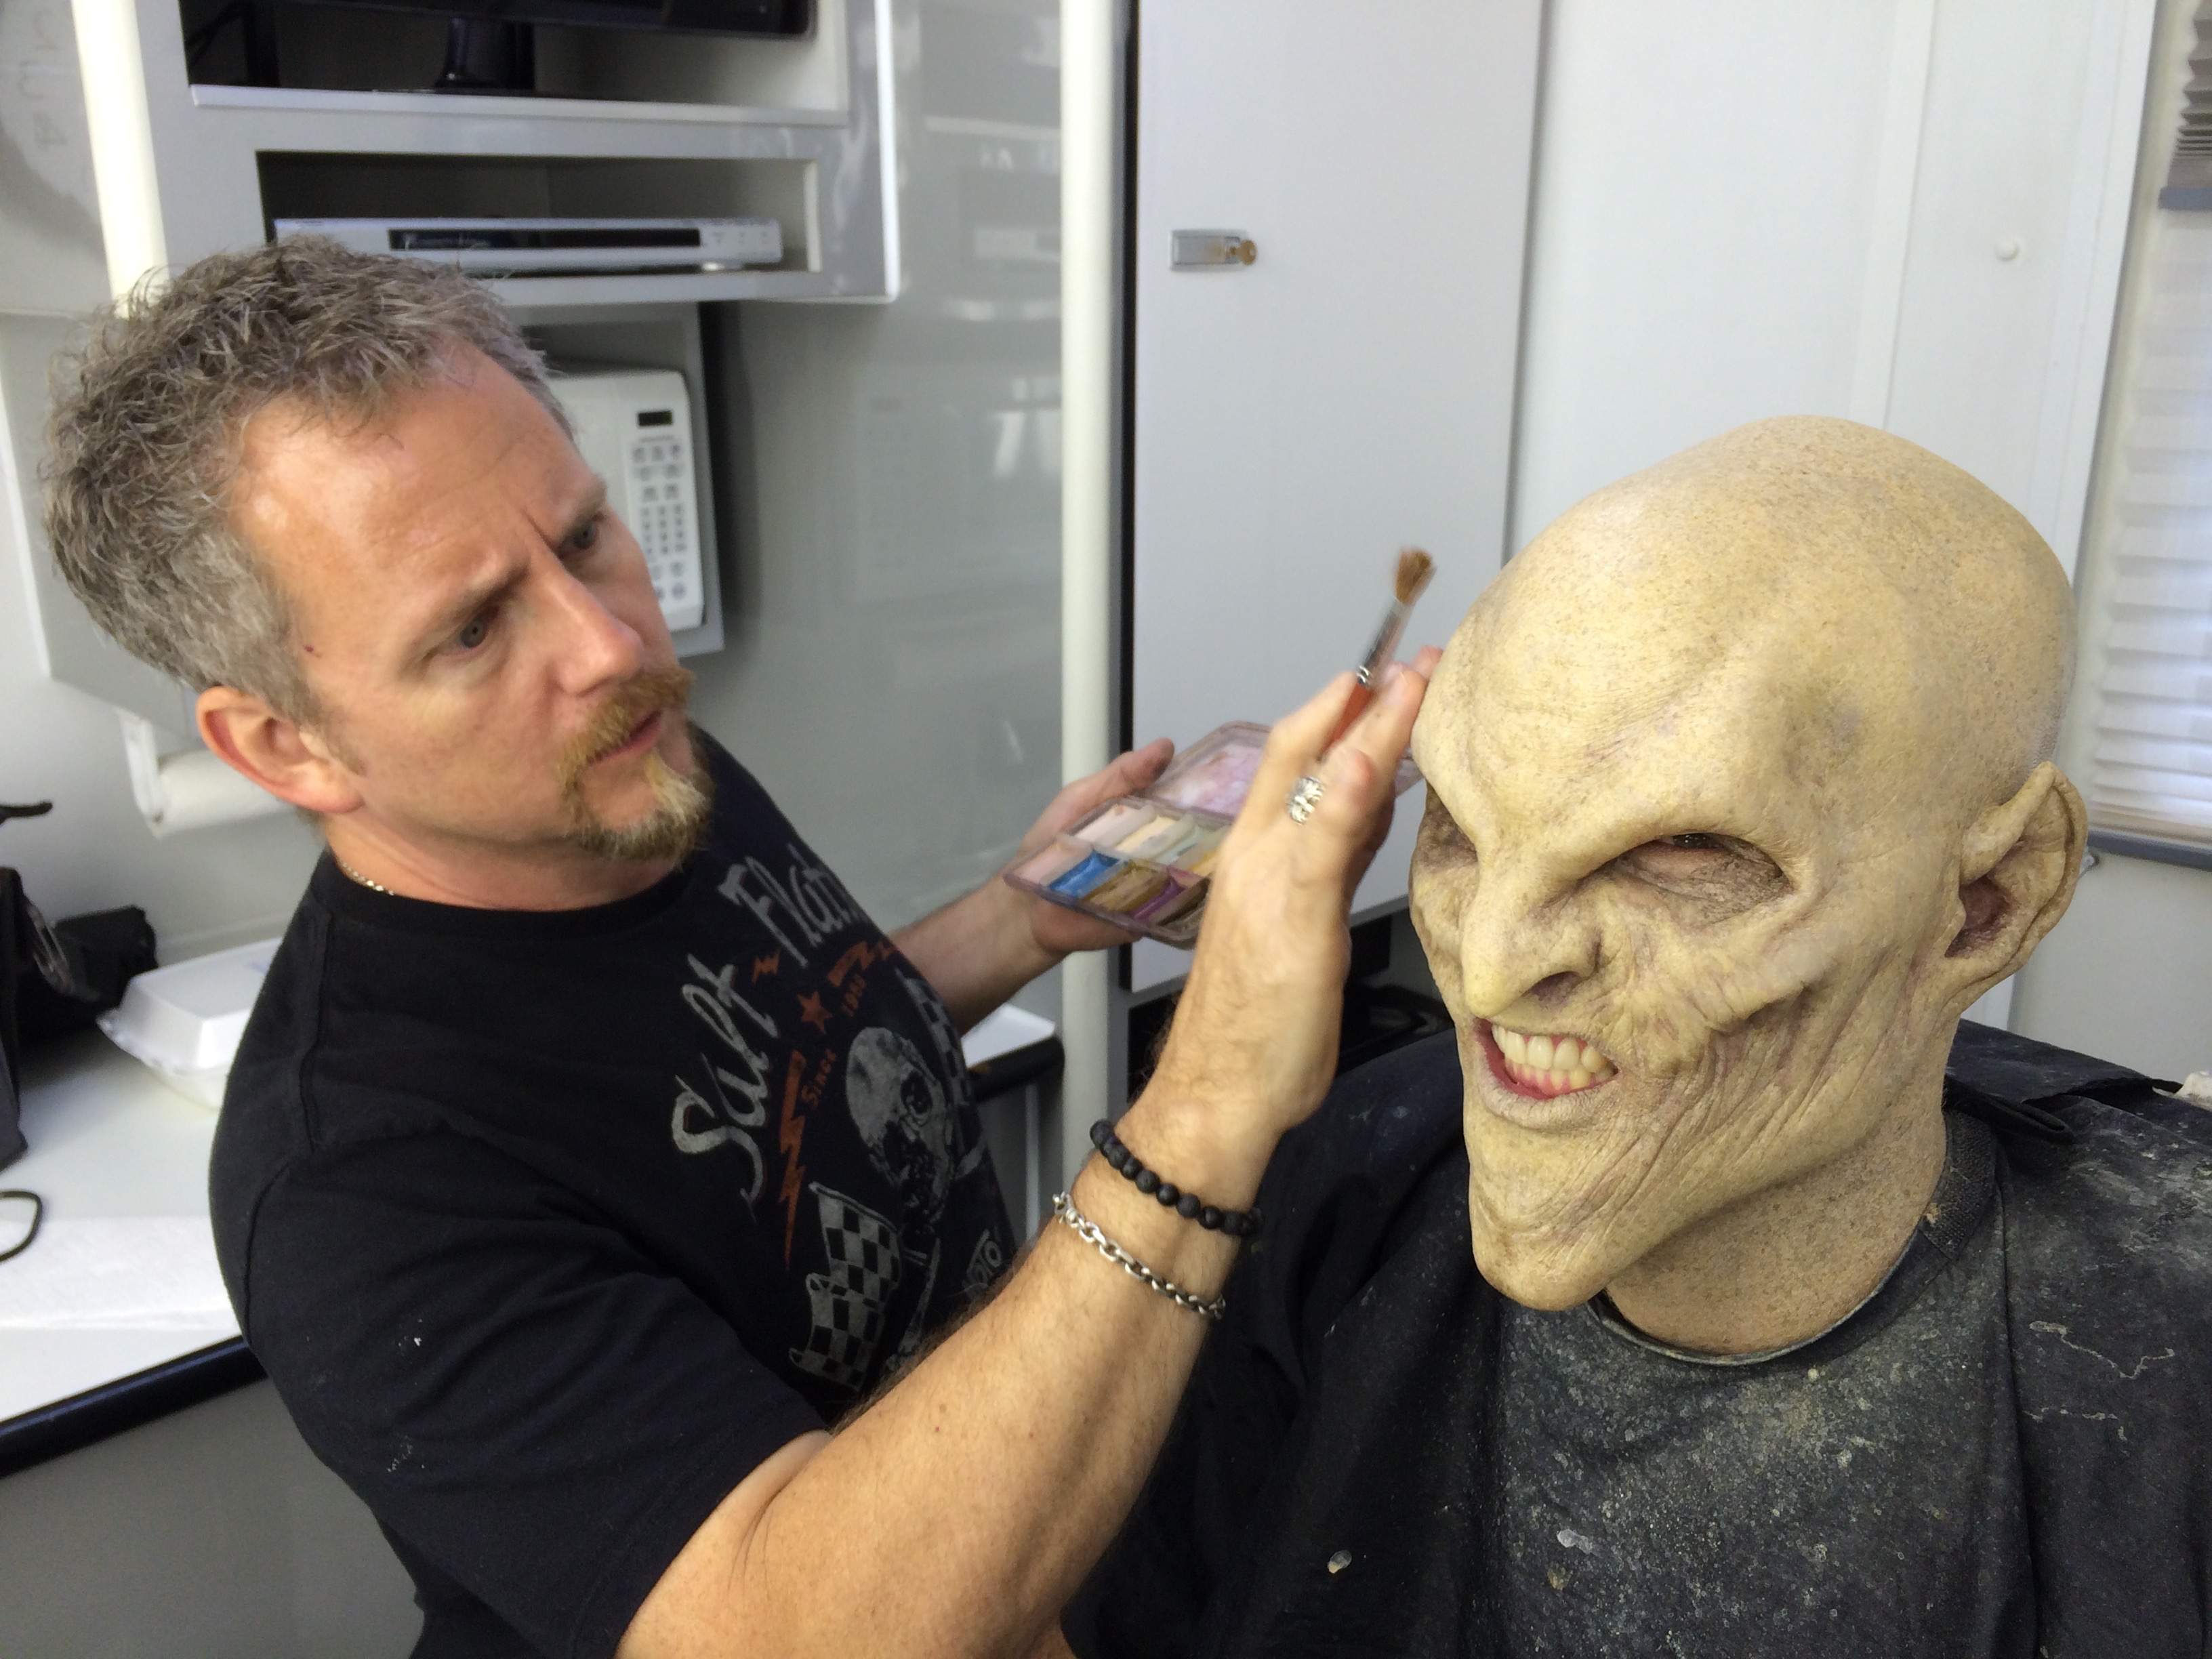 Corey Castellano One Of Hollywood S Top Makeup Effects Artists Calls Tampa Home Monster makeup fx recently brought the dancing aliens to life for earthgang's up video. makeup effects artists calls tampa